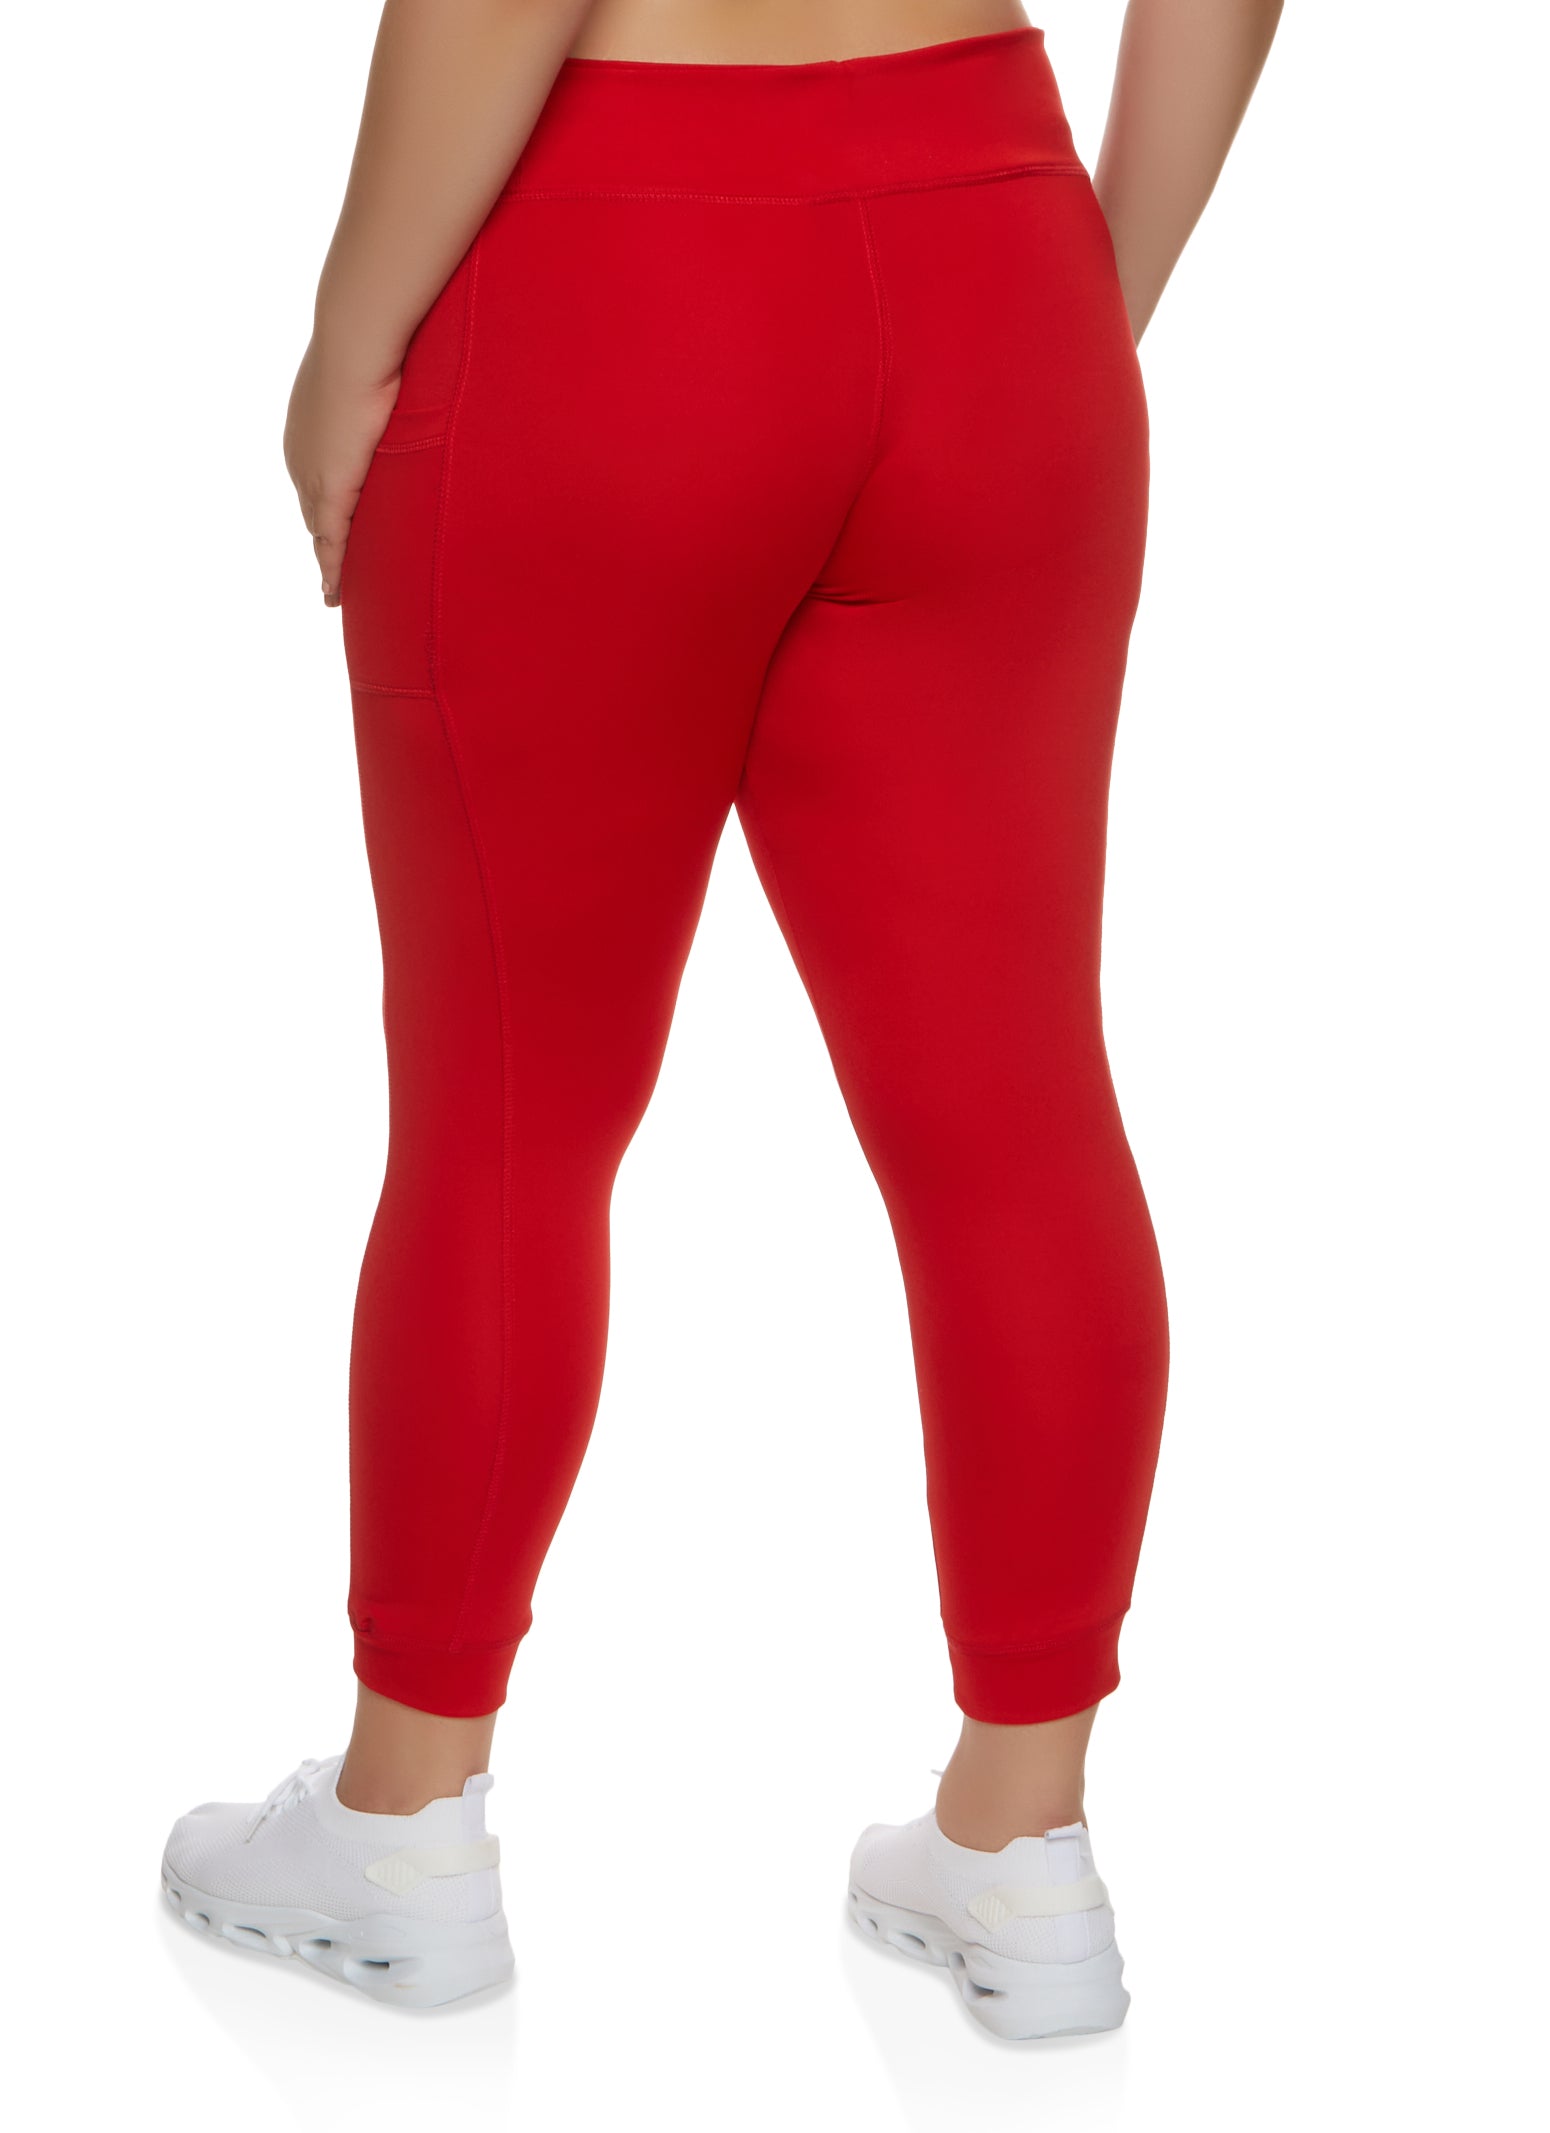 Plus Size Cell Phone Pocket Active Leggings - Red